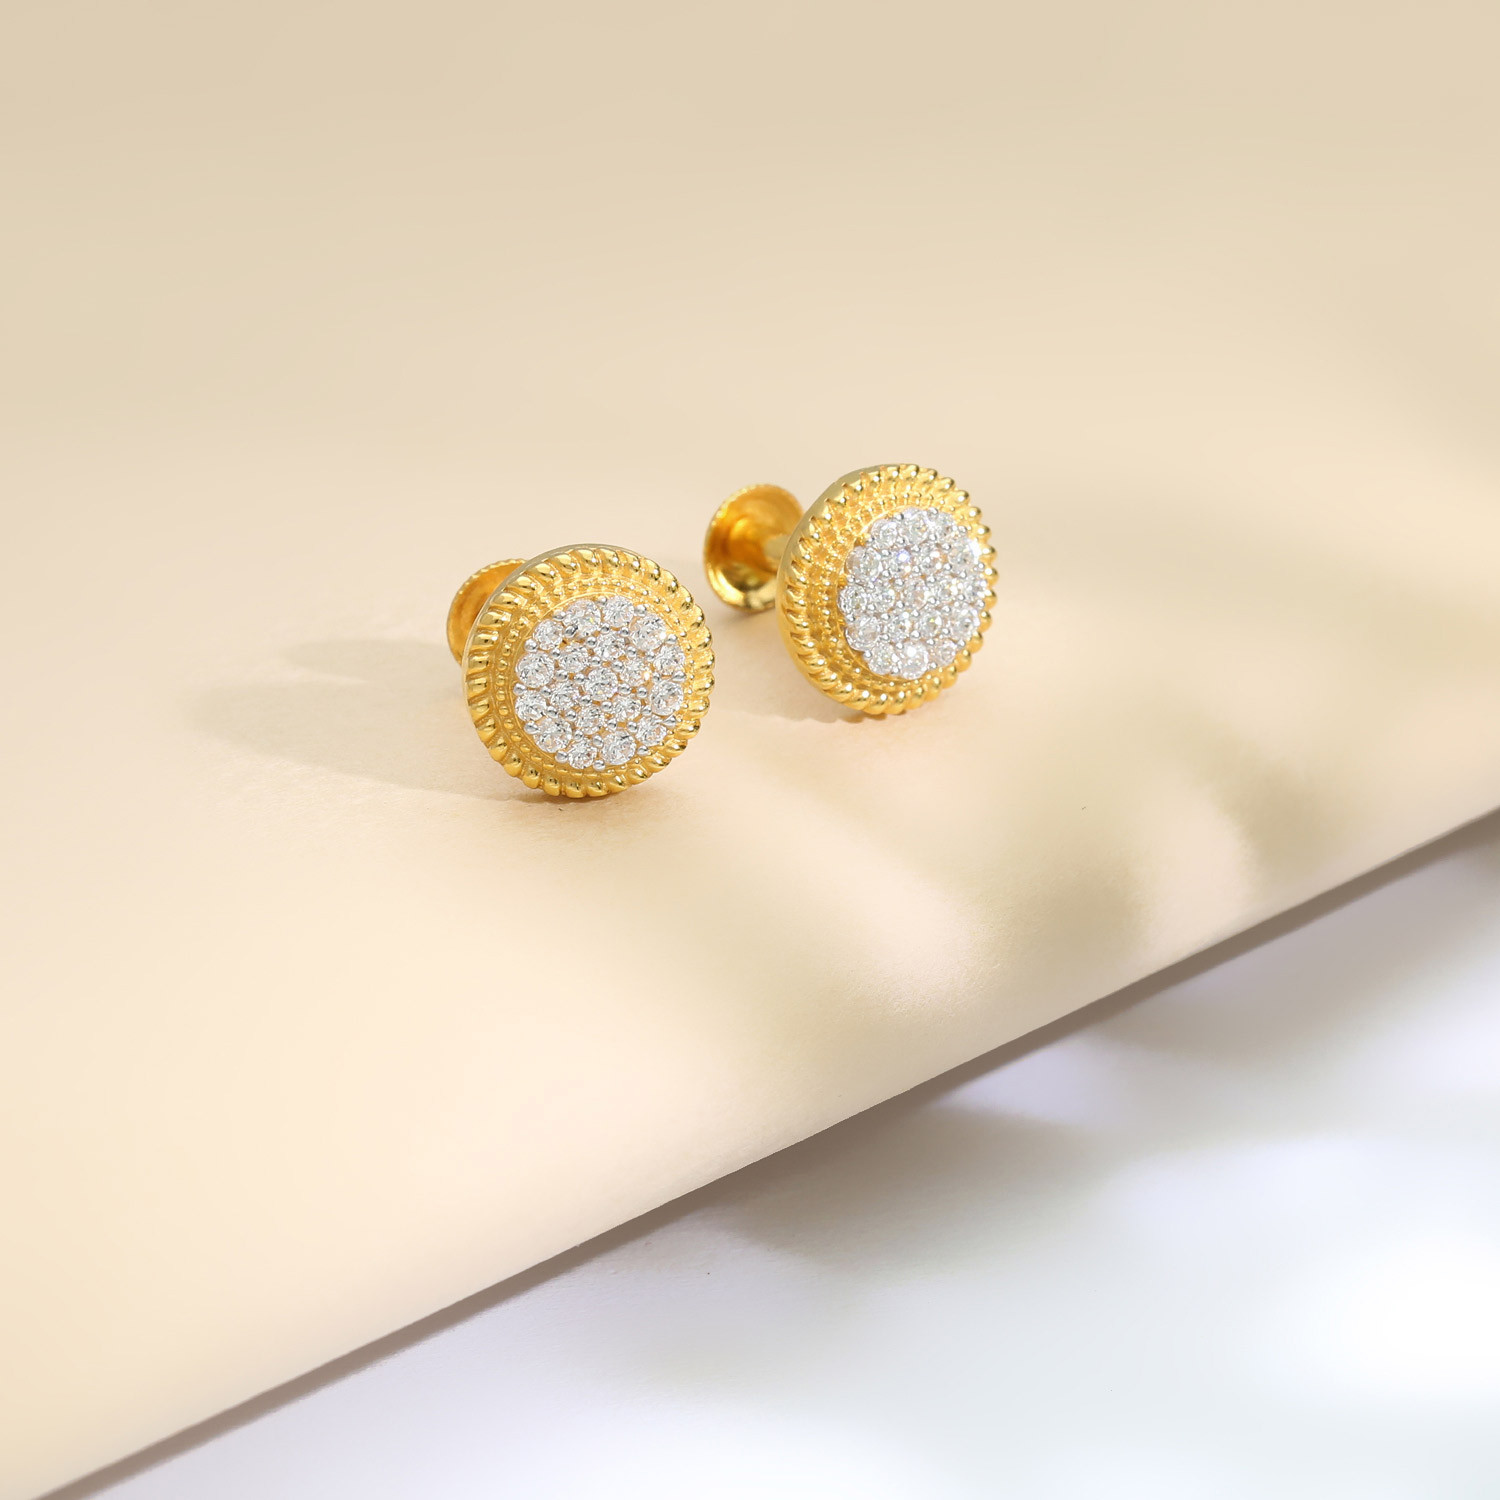 Malabar Gold and Diamonds on Instagram Welcome to a festival celebrating  earrings    Gold jewelry outfits Bridal gold jewellery designs Gold earrings  designs